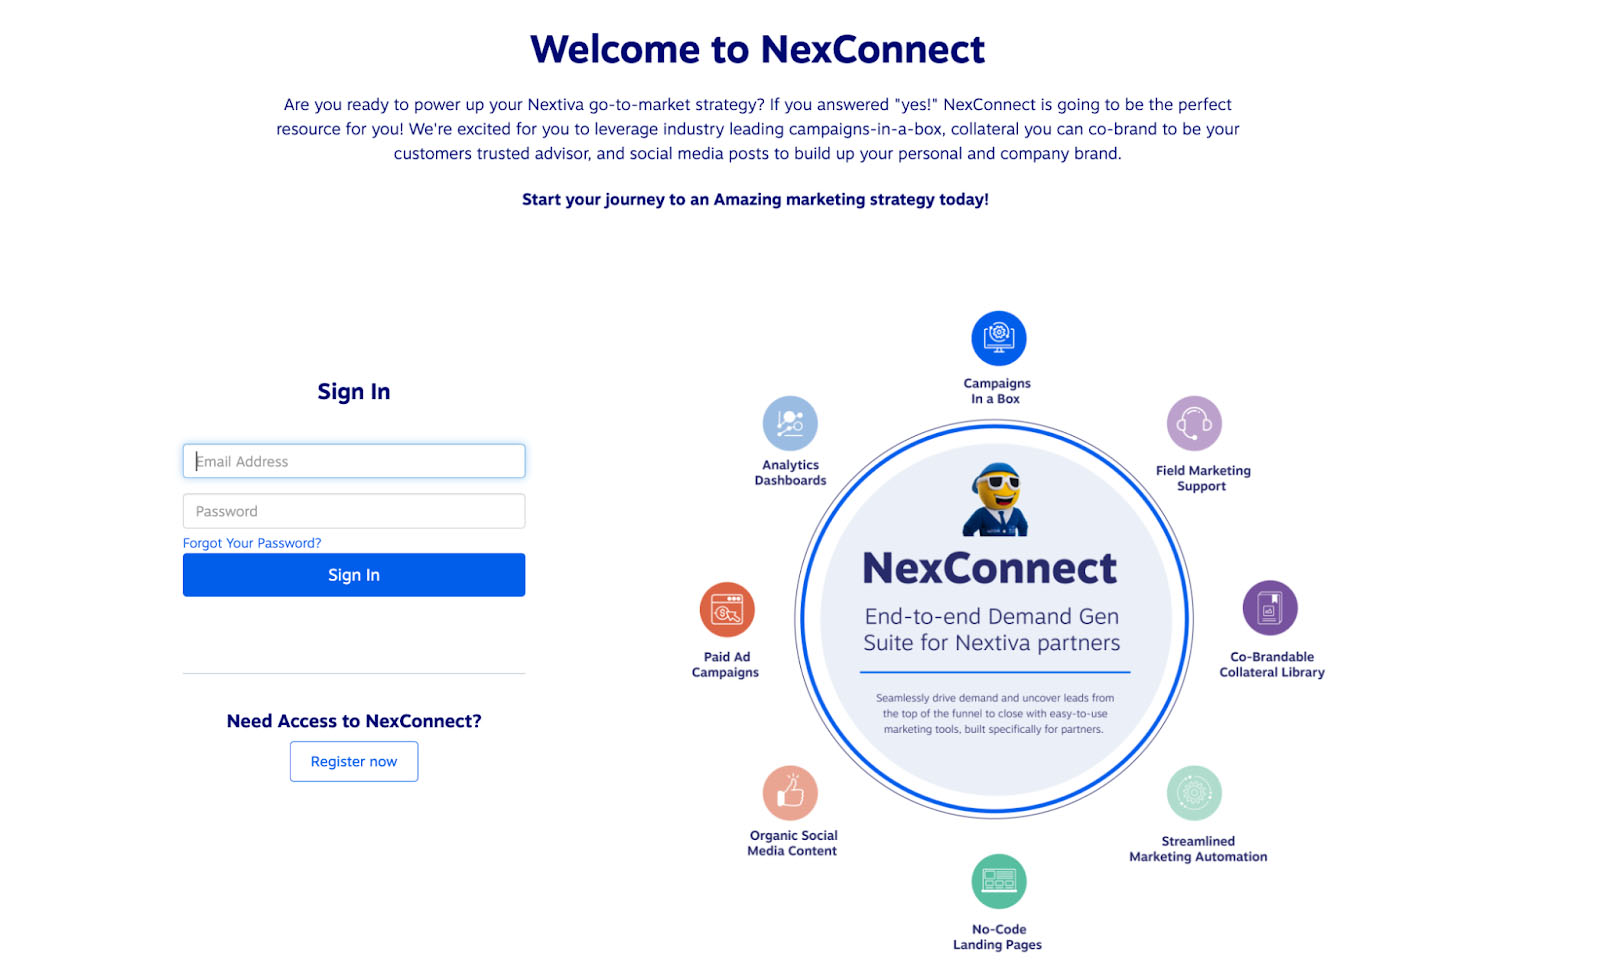 A webpage displaying the NexConnect portal with email address and password input fields for signing in.